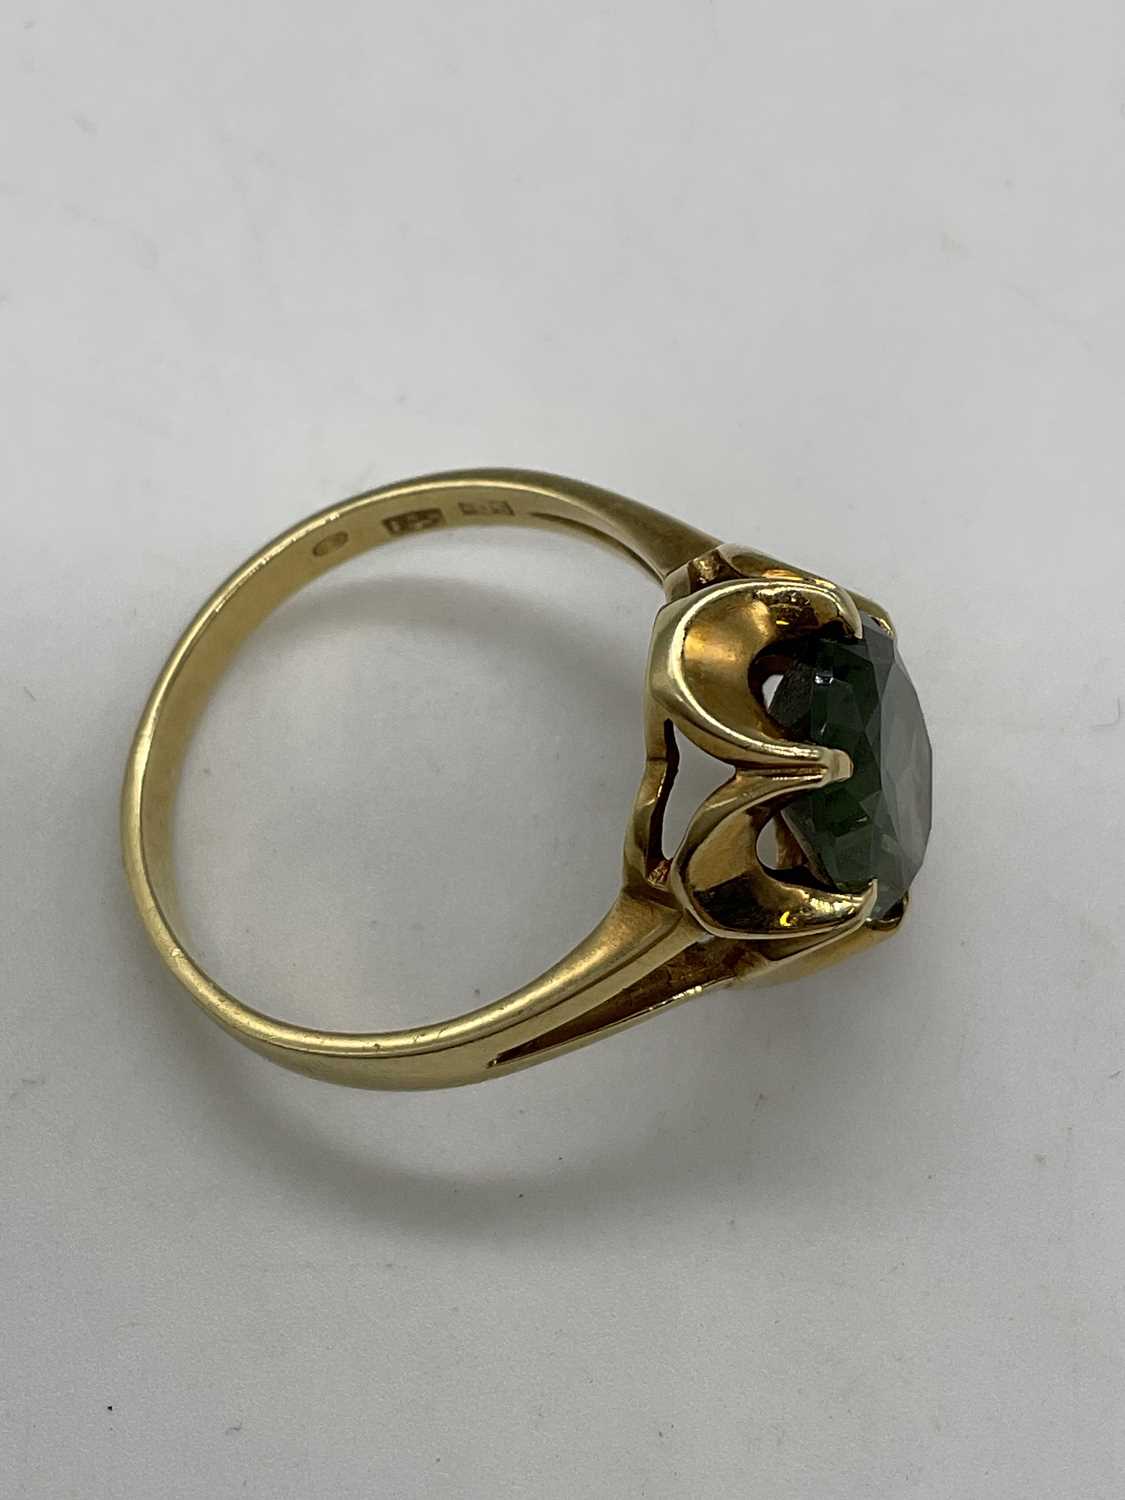 A 14ct yellow gold dress ring set with pale green stone (possible chrome tourmaline), size N, - Image 4 of 4